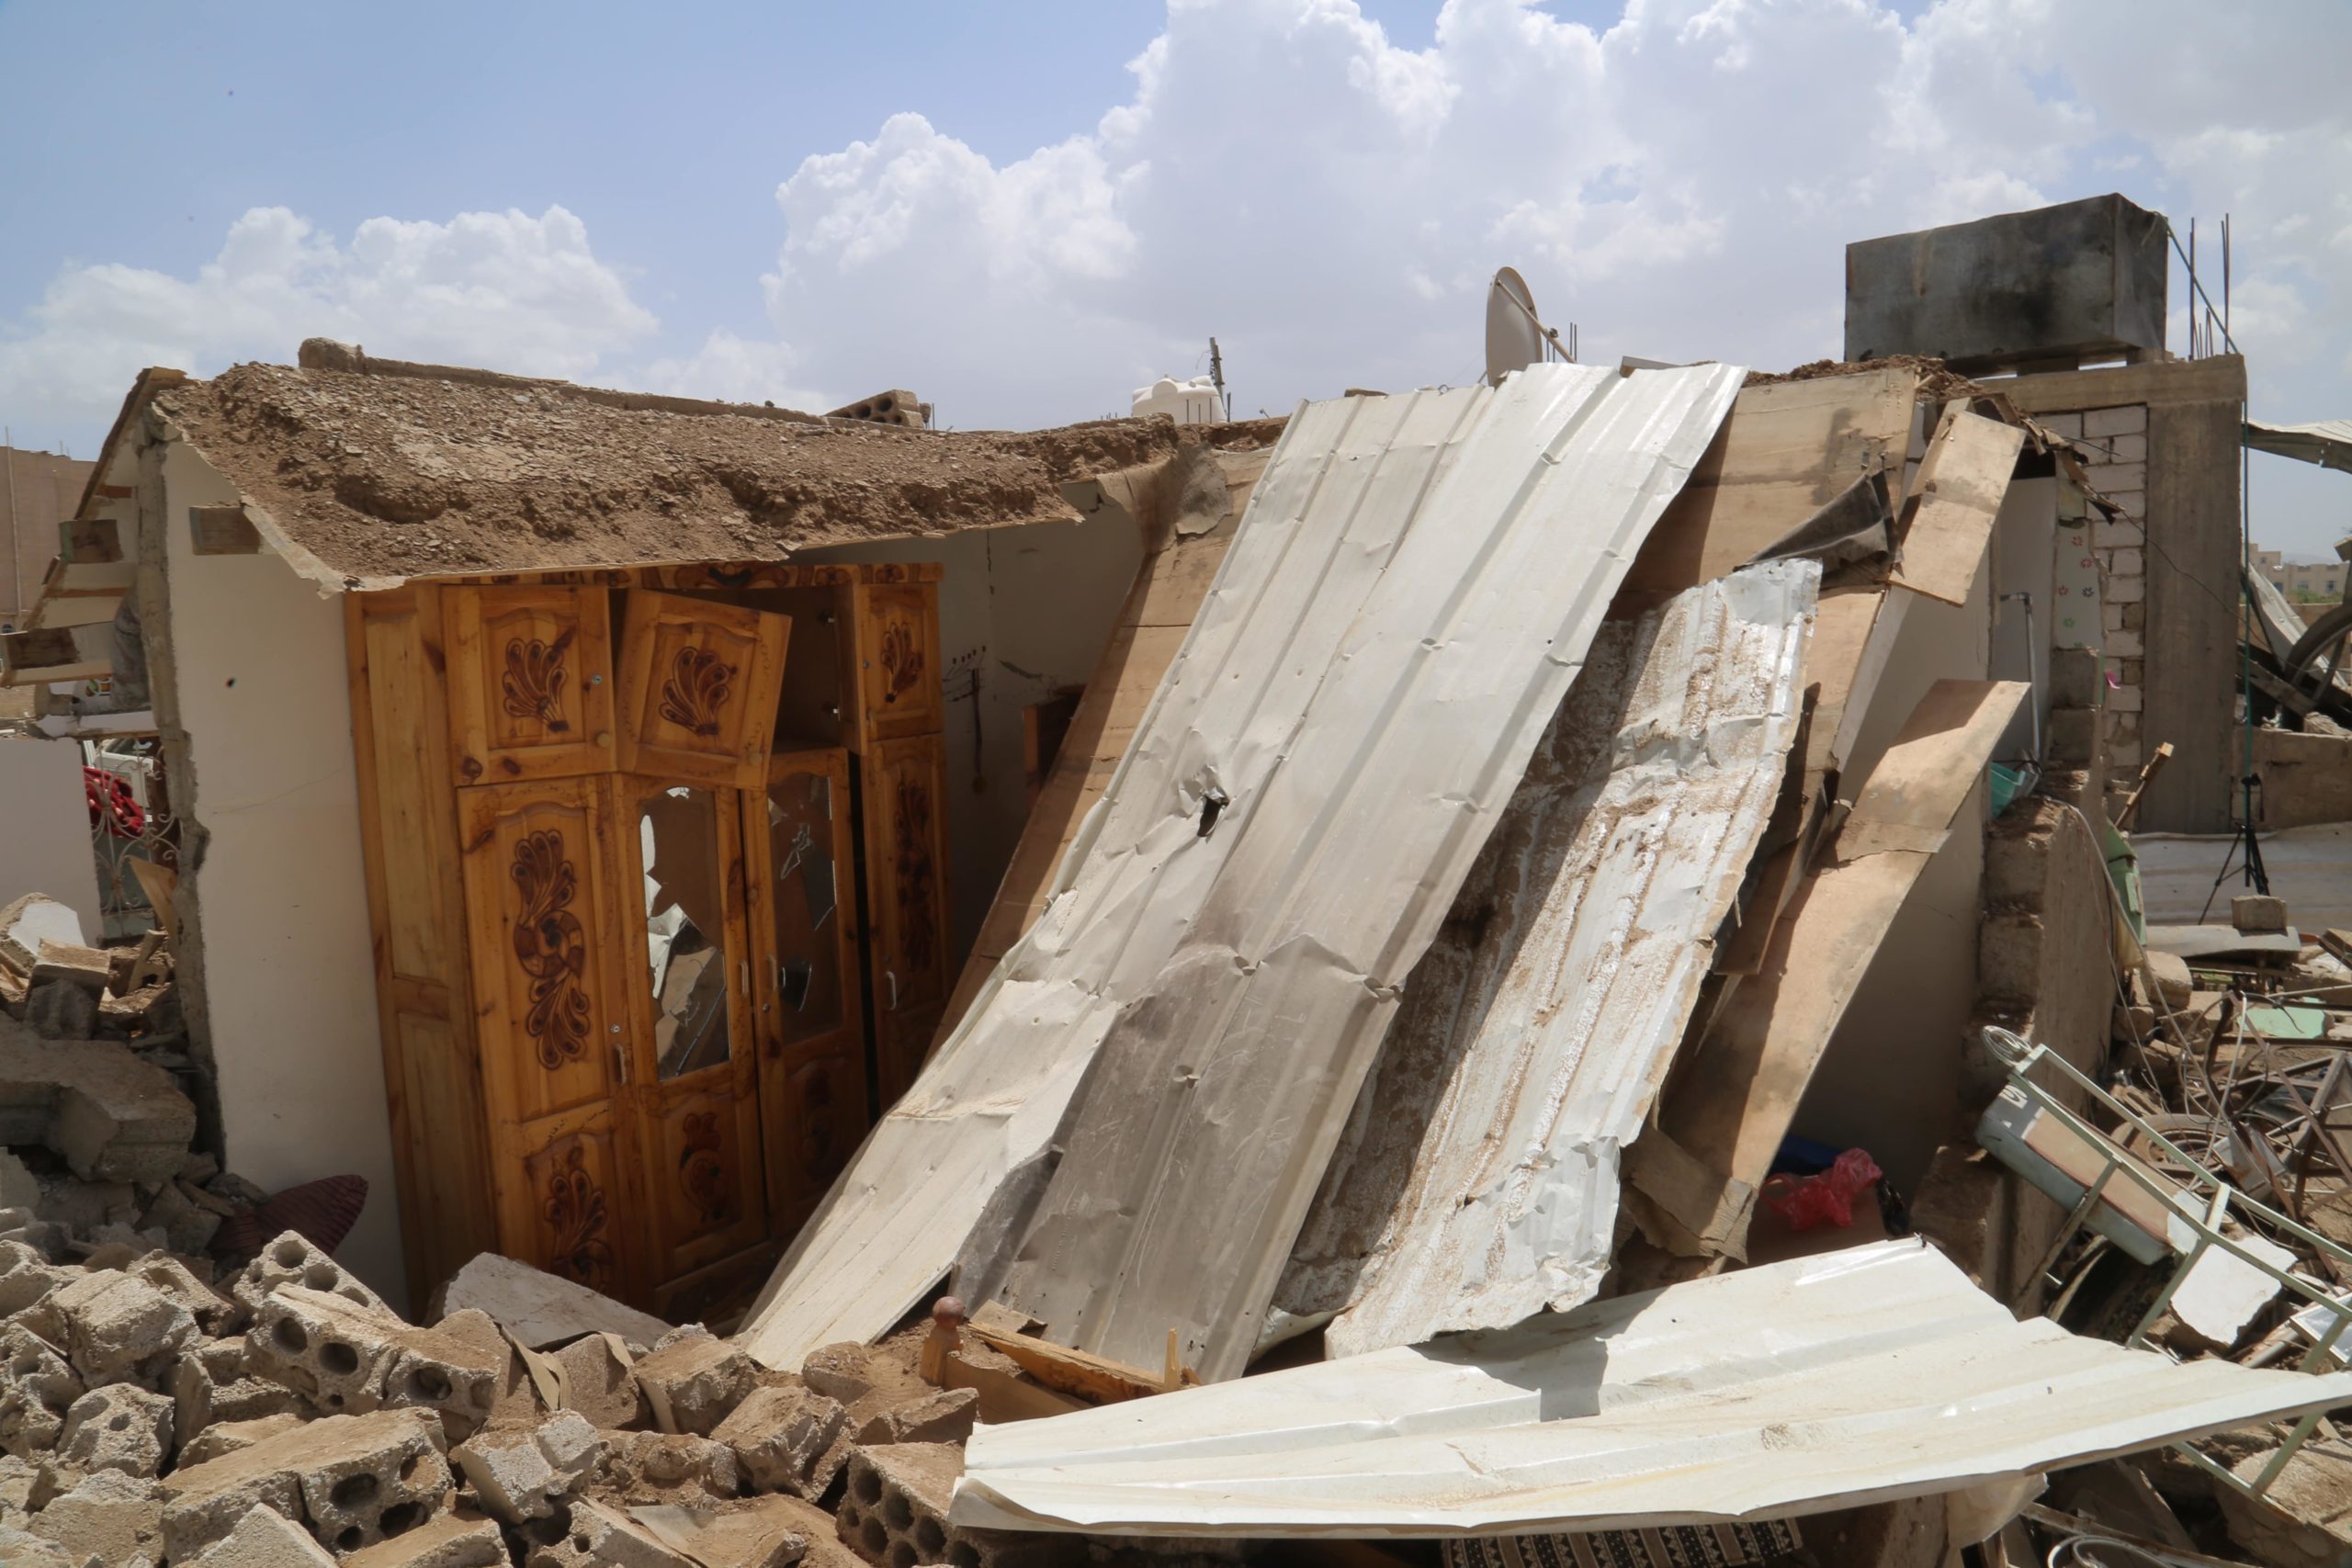 Airstrikes destroy home of Yemeni orphans sponsored by Islamic Relief